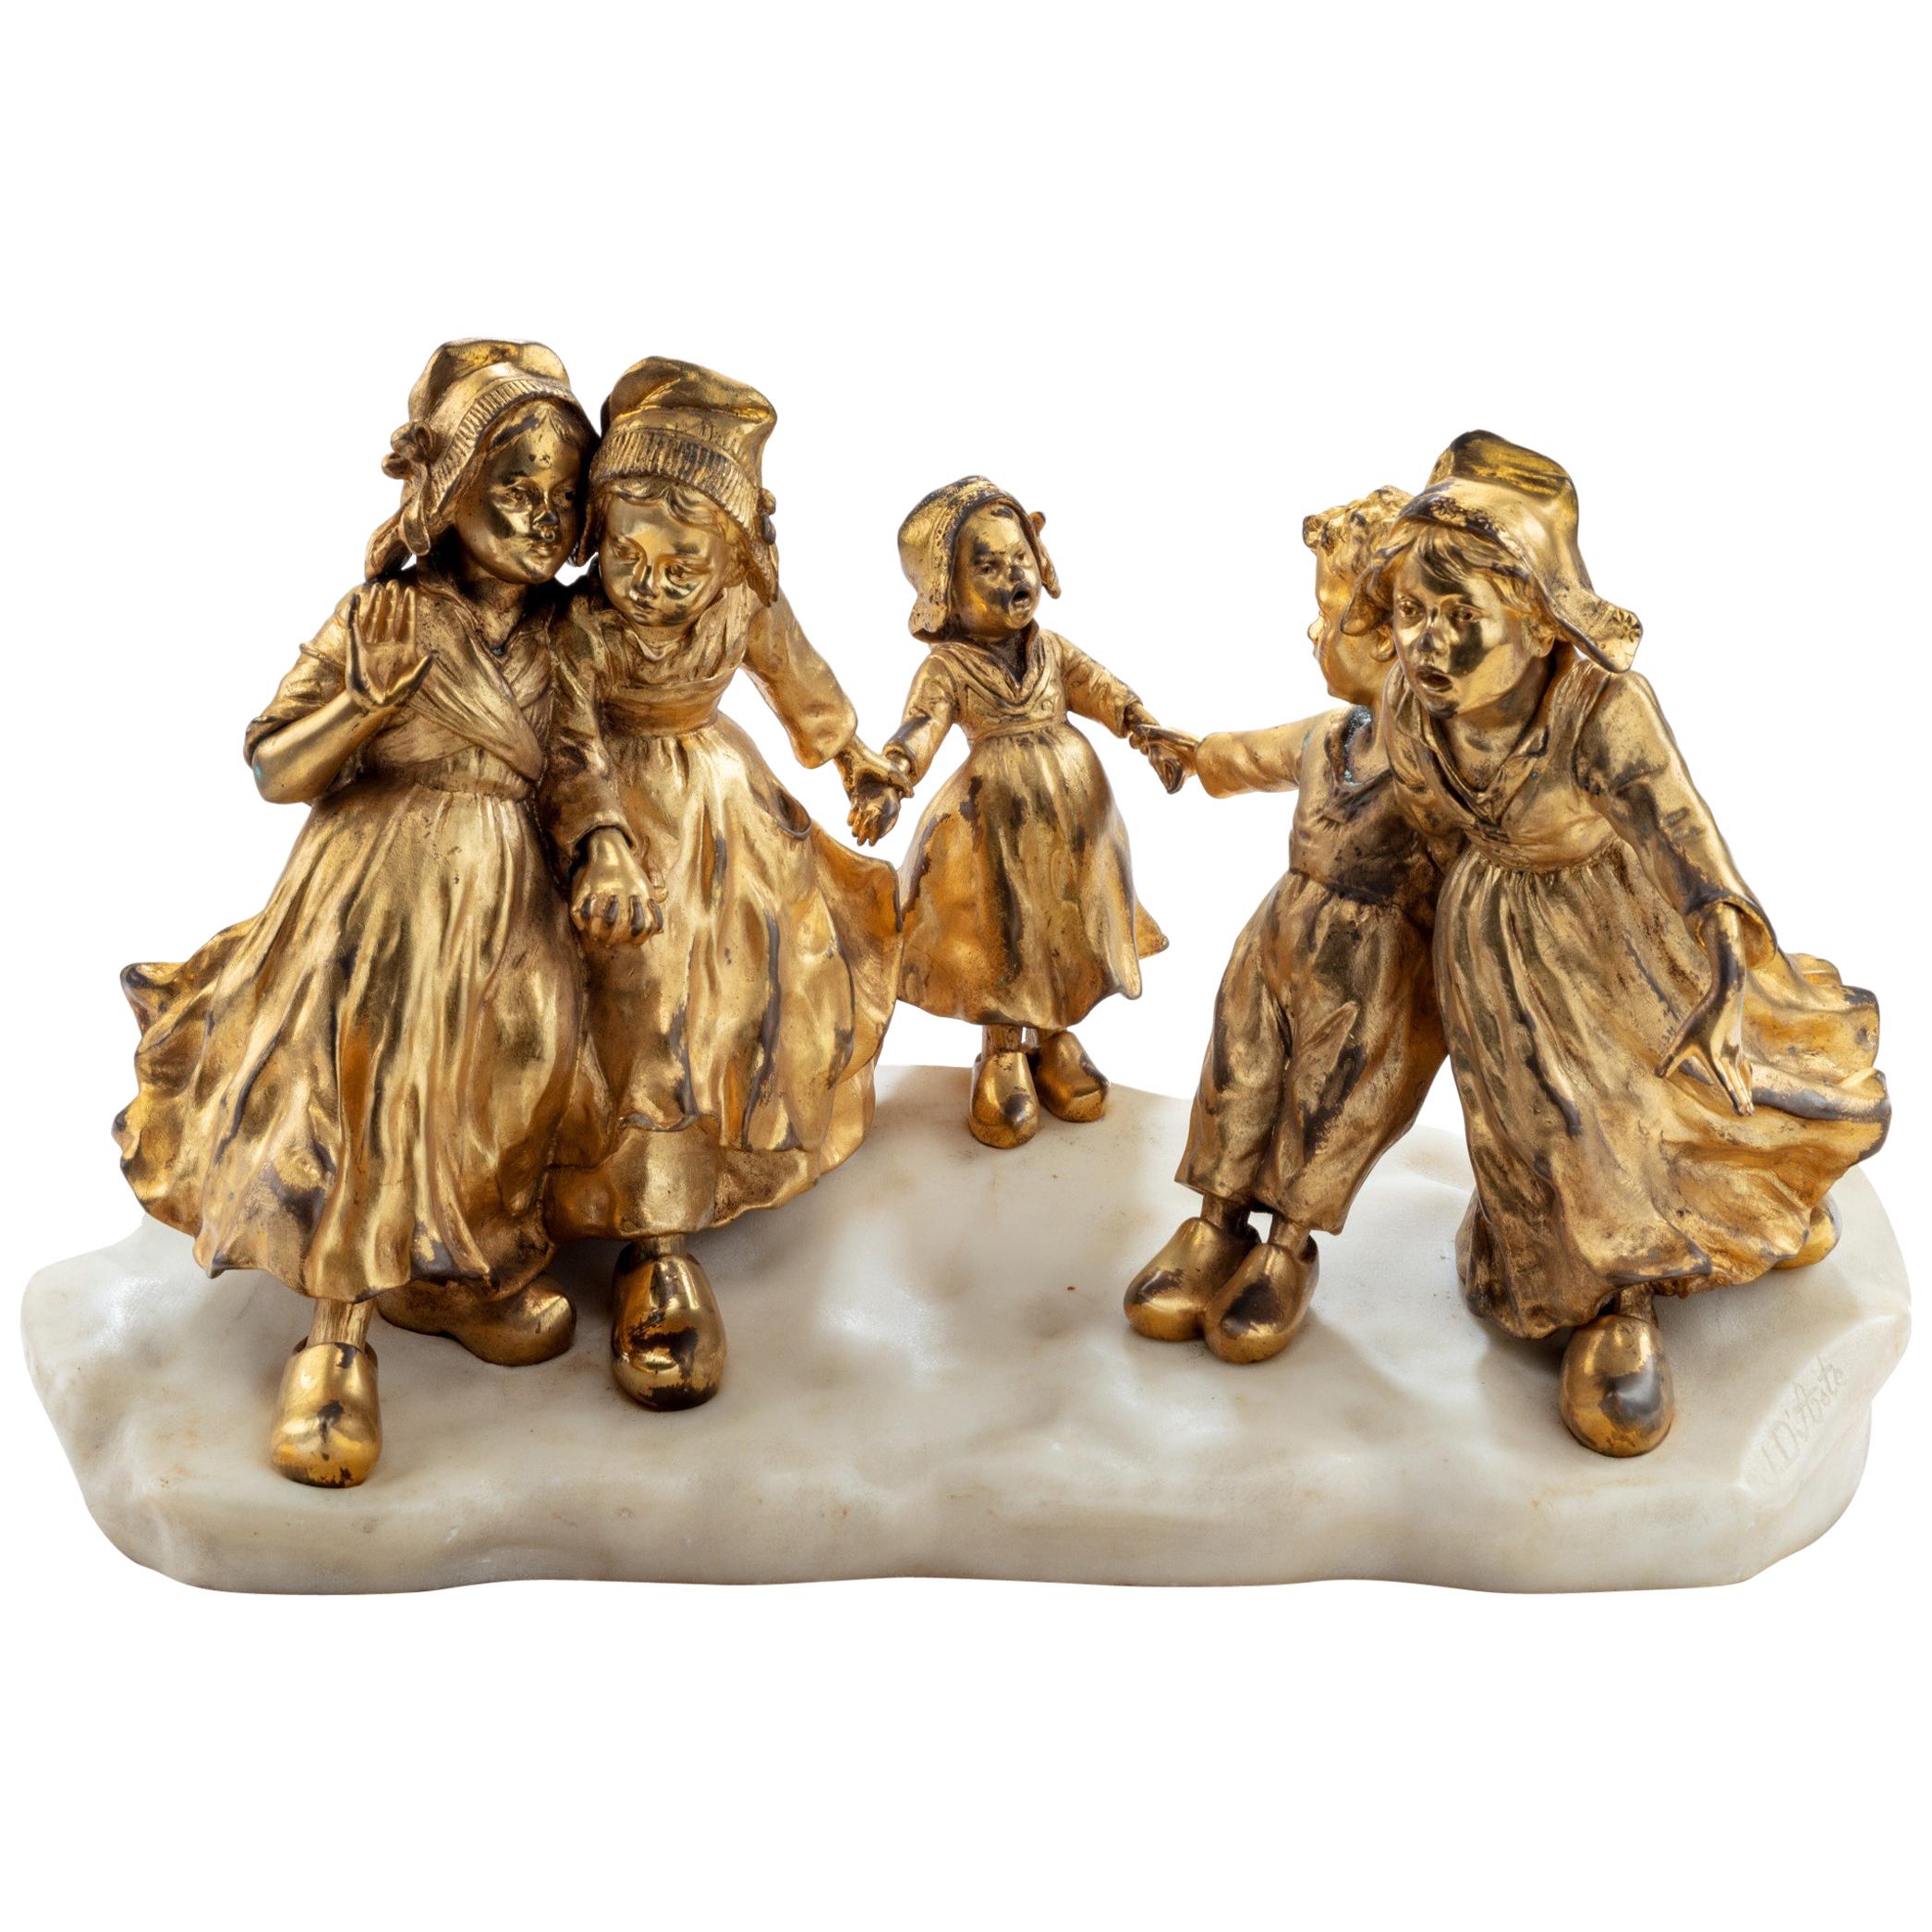 A charming gilt bronze group of Dutch children by Guiseppe or Joseph D’Aste